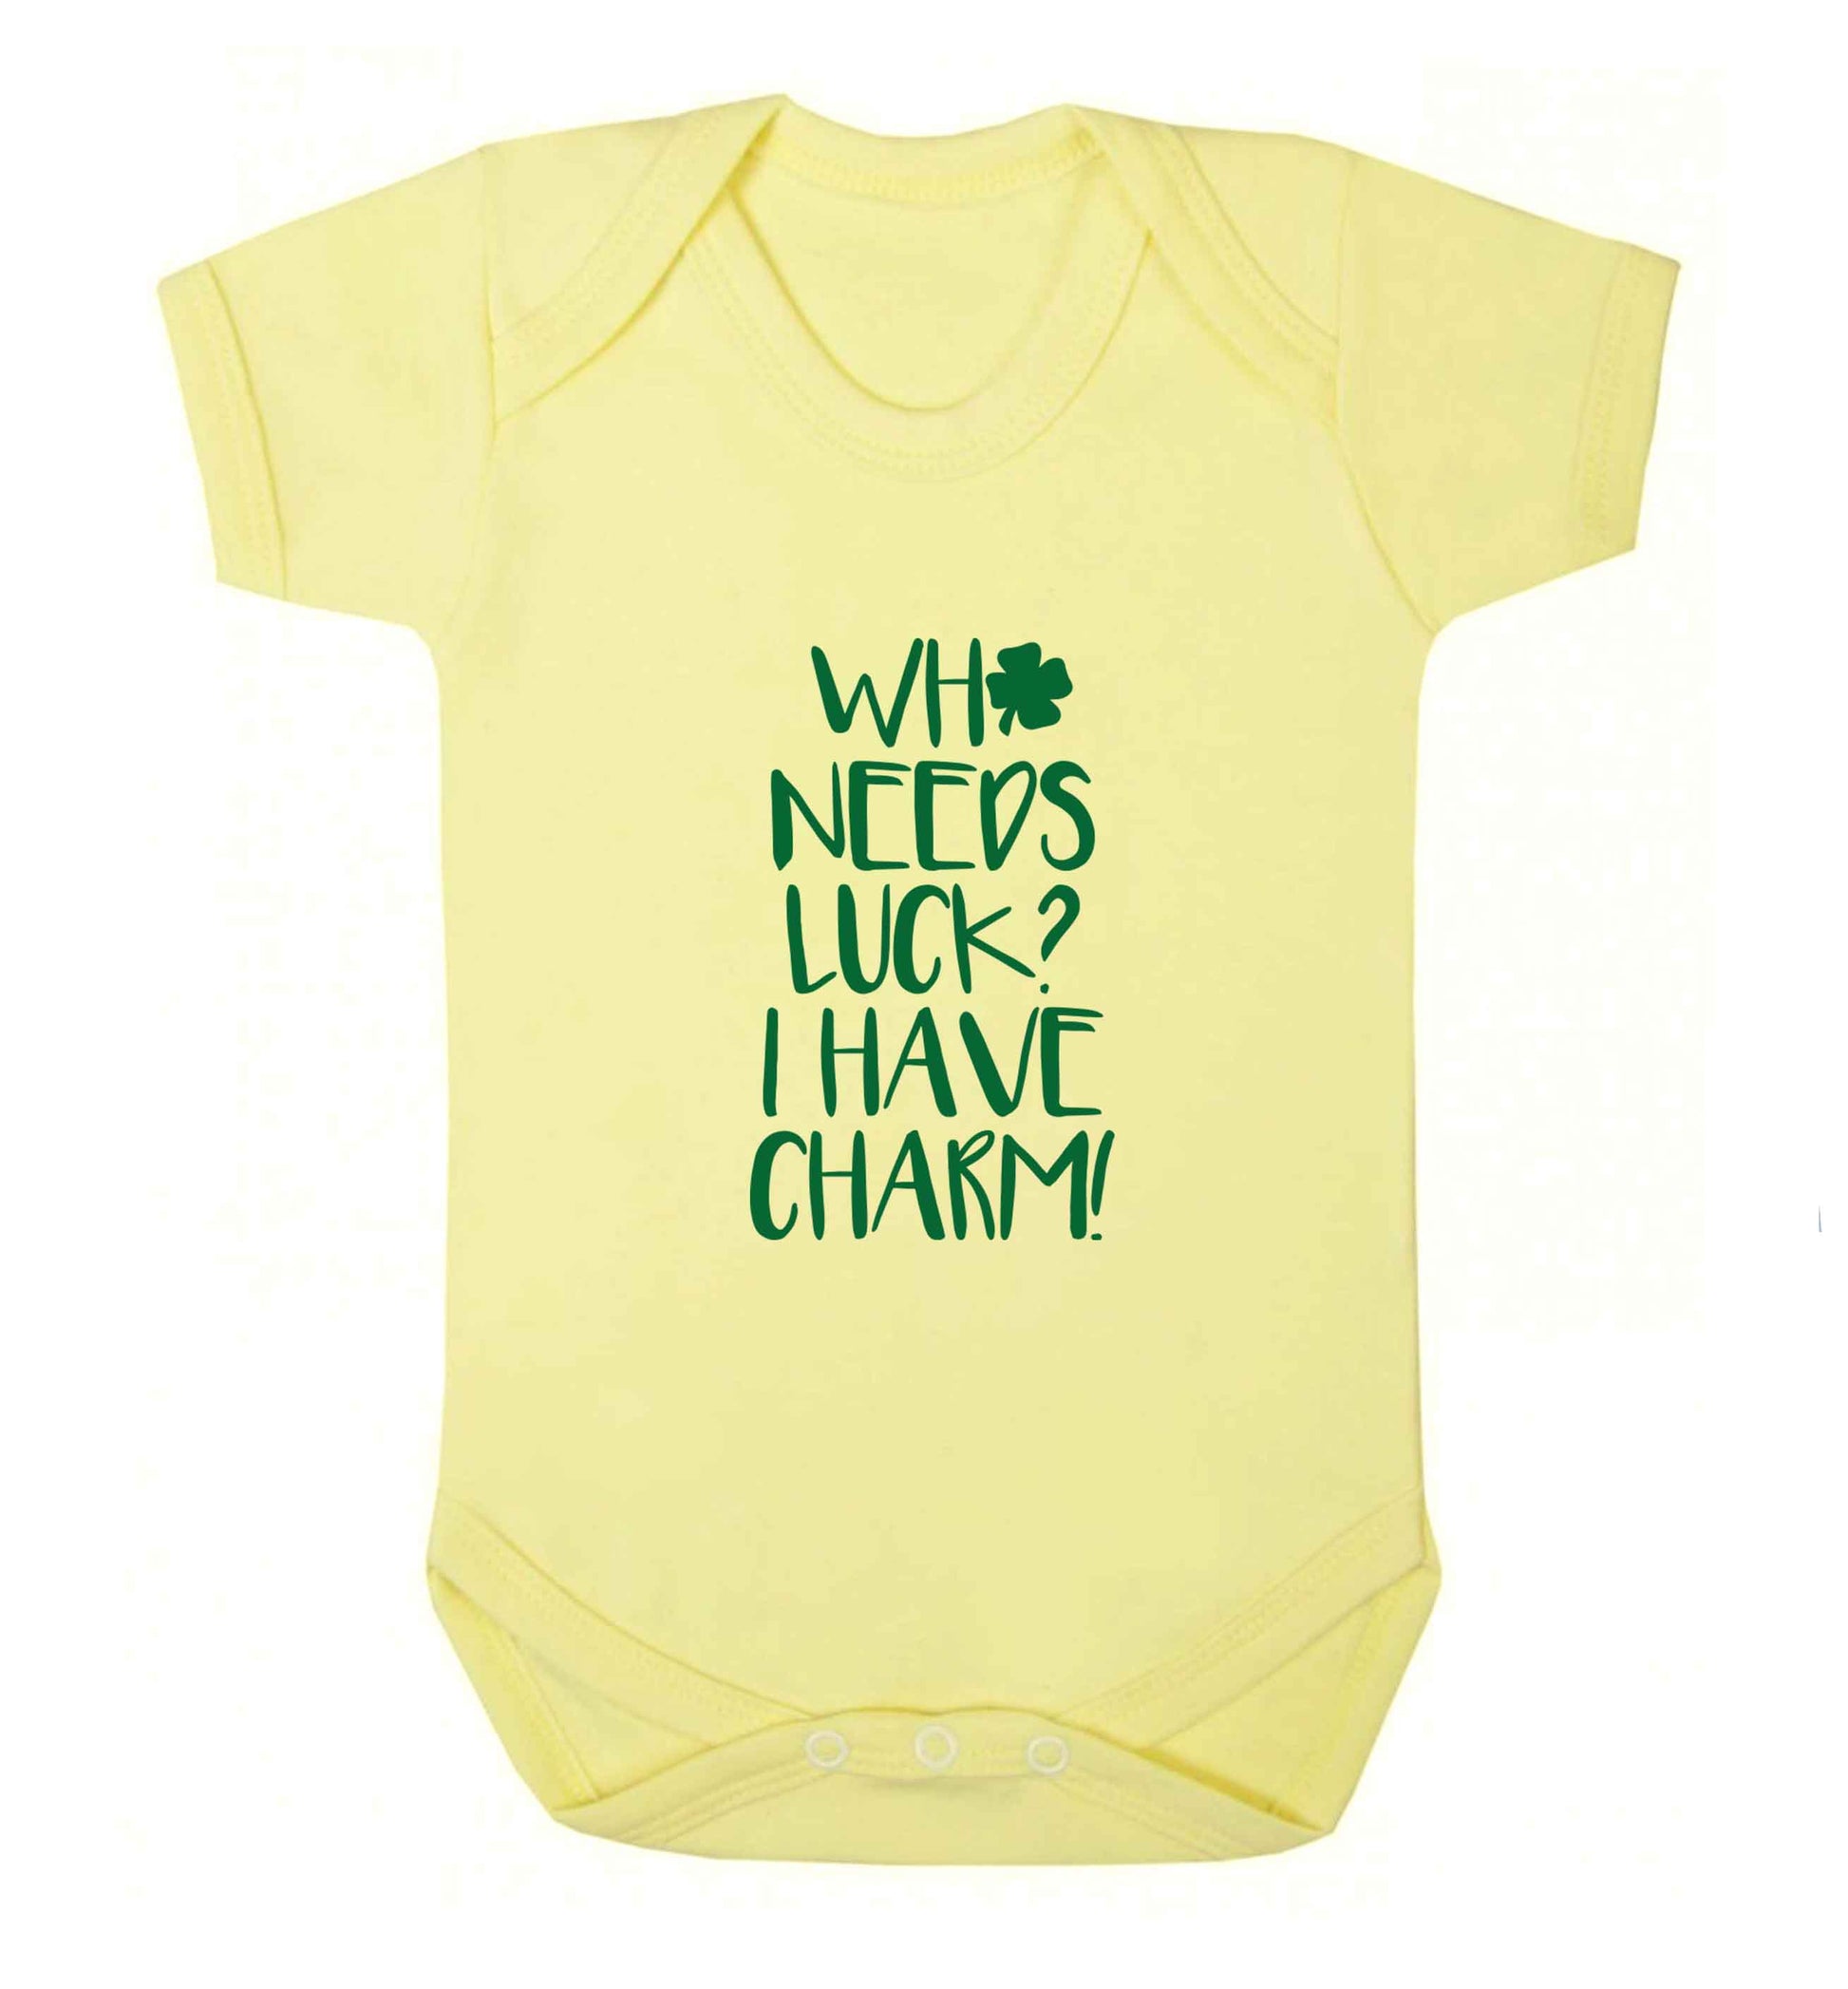 Who needs luck? I have charm! baby vest pale yellow 18-24 months